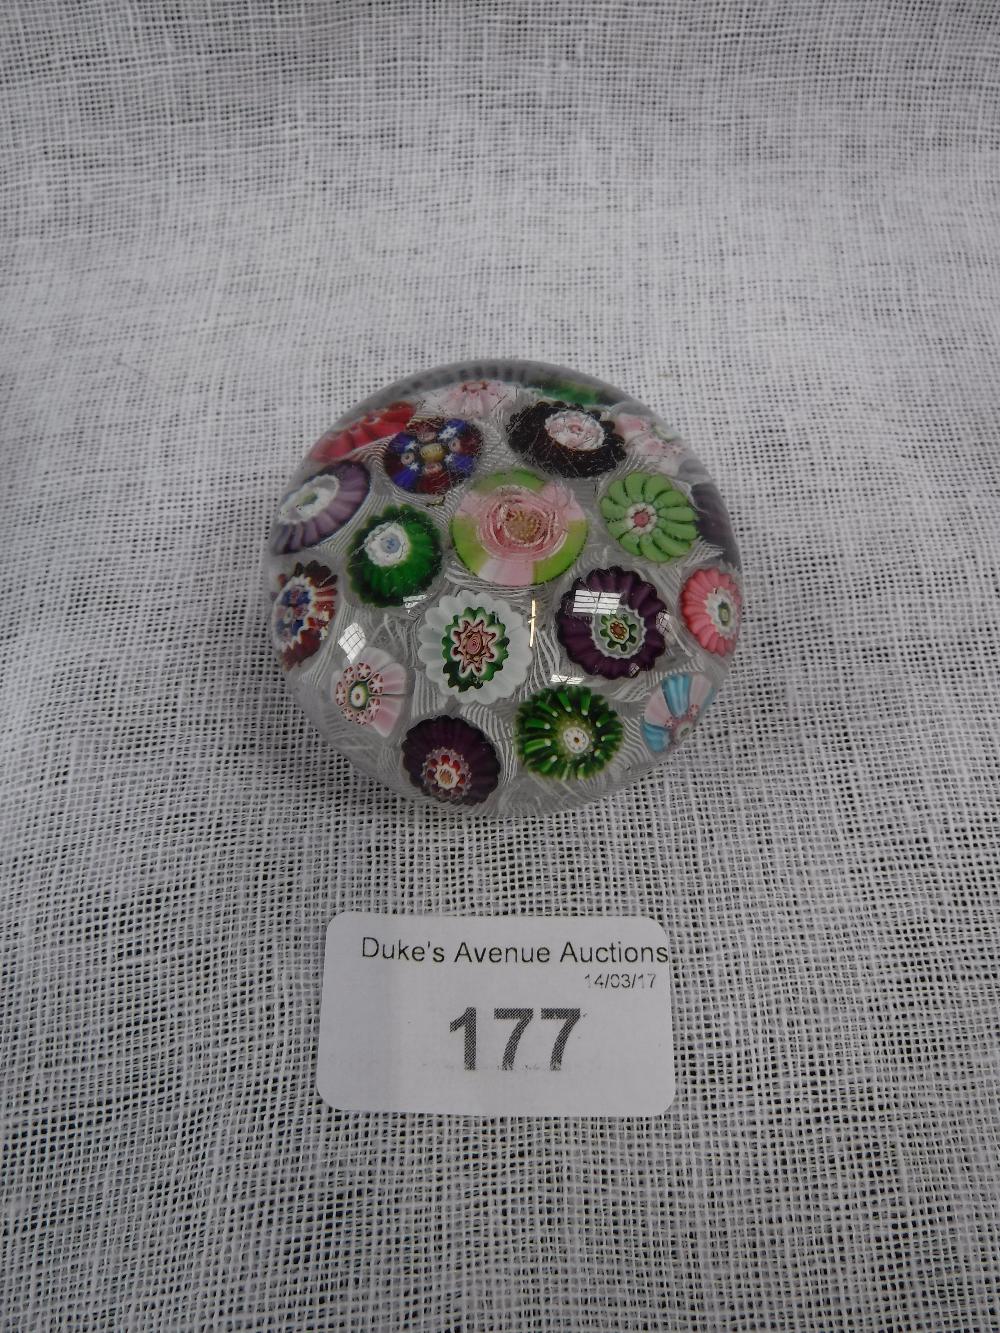 A SMALL PAPERWEIGHT with floral canes against a lacy white ground